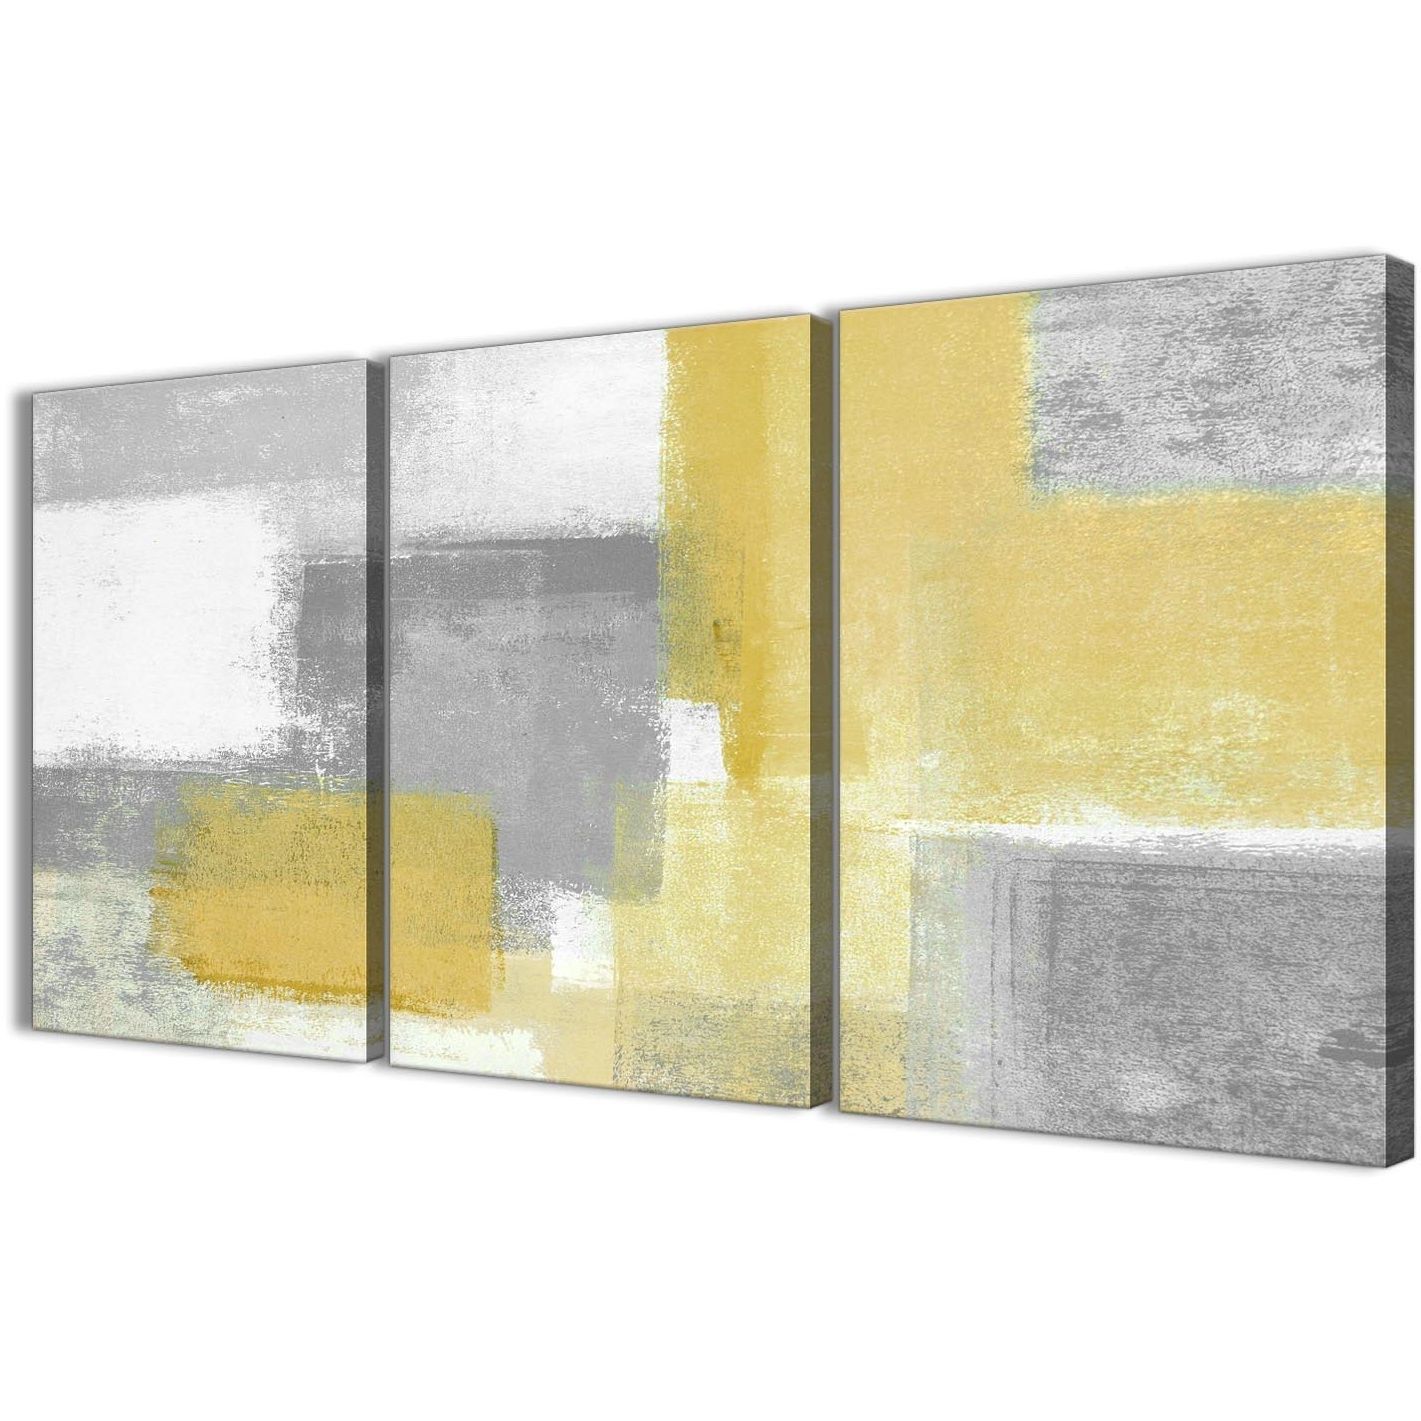 Most Popular 3 Set Canvas Wall Art For 3 Panel Mustard Yellow Grey Kitchen Canvas Wall Art Decor (View 13 of 15)